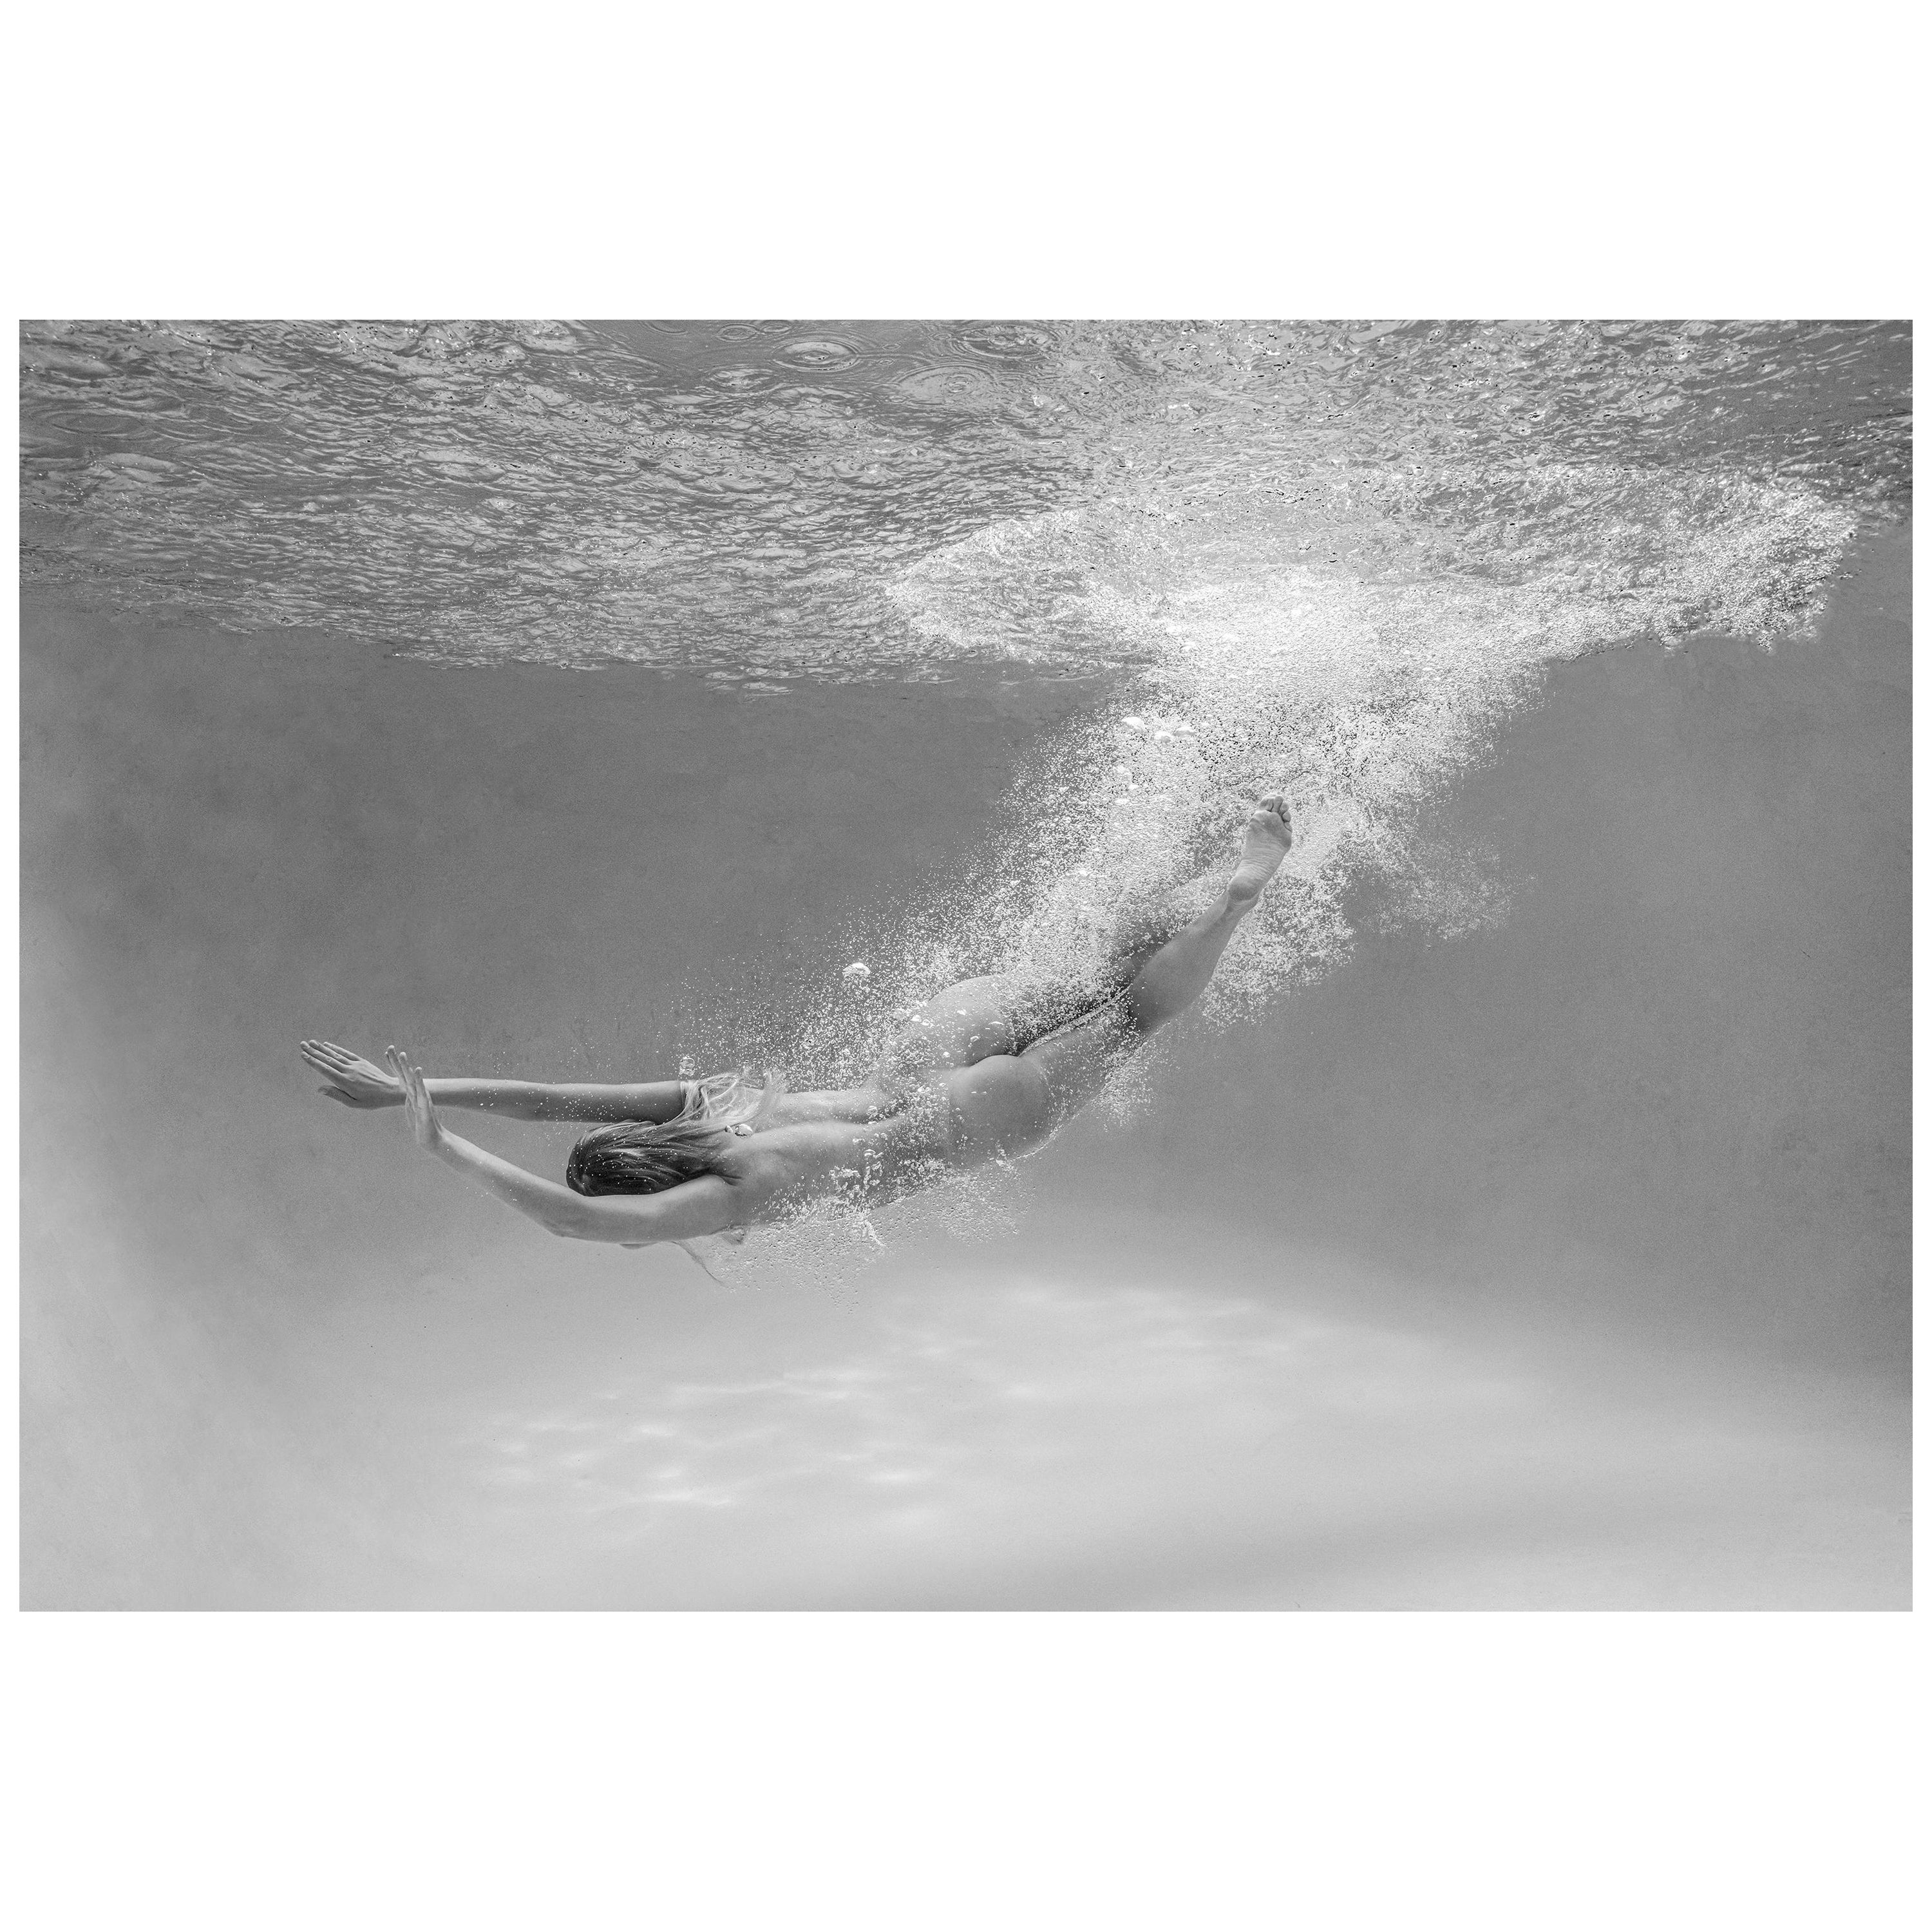 Alex Sher Black and White Photograph - Under - underwater black & white nude photograph - print on aluminum 36x53"